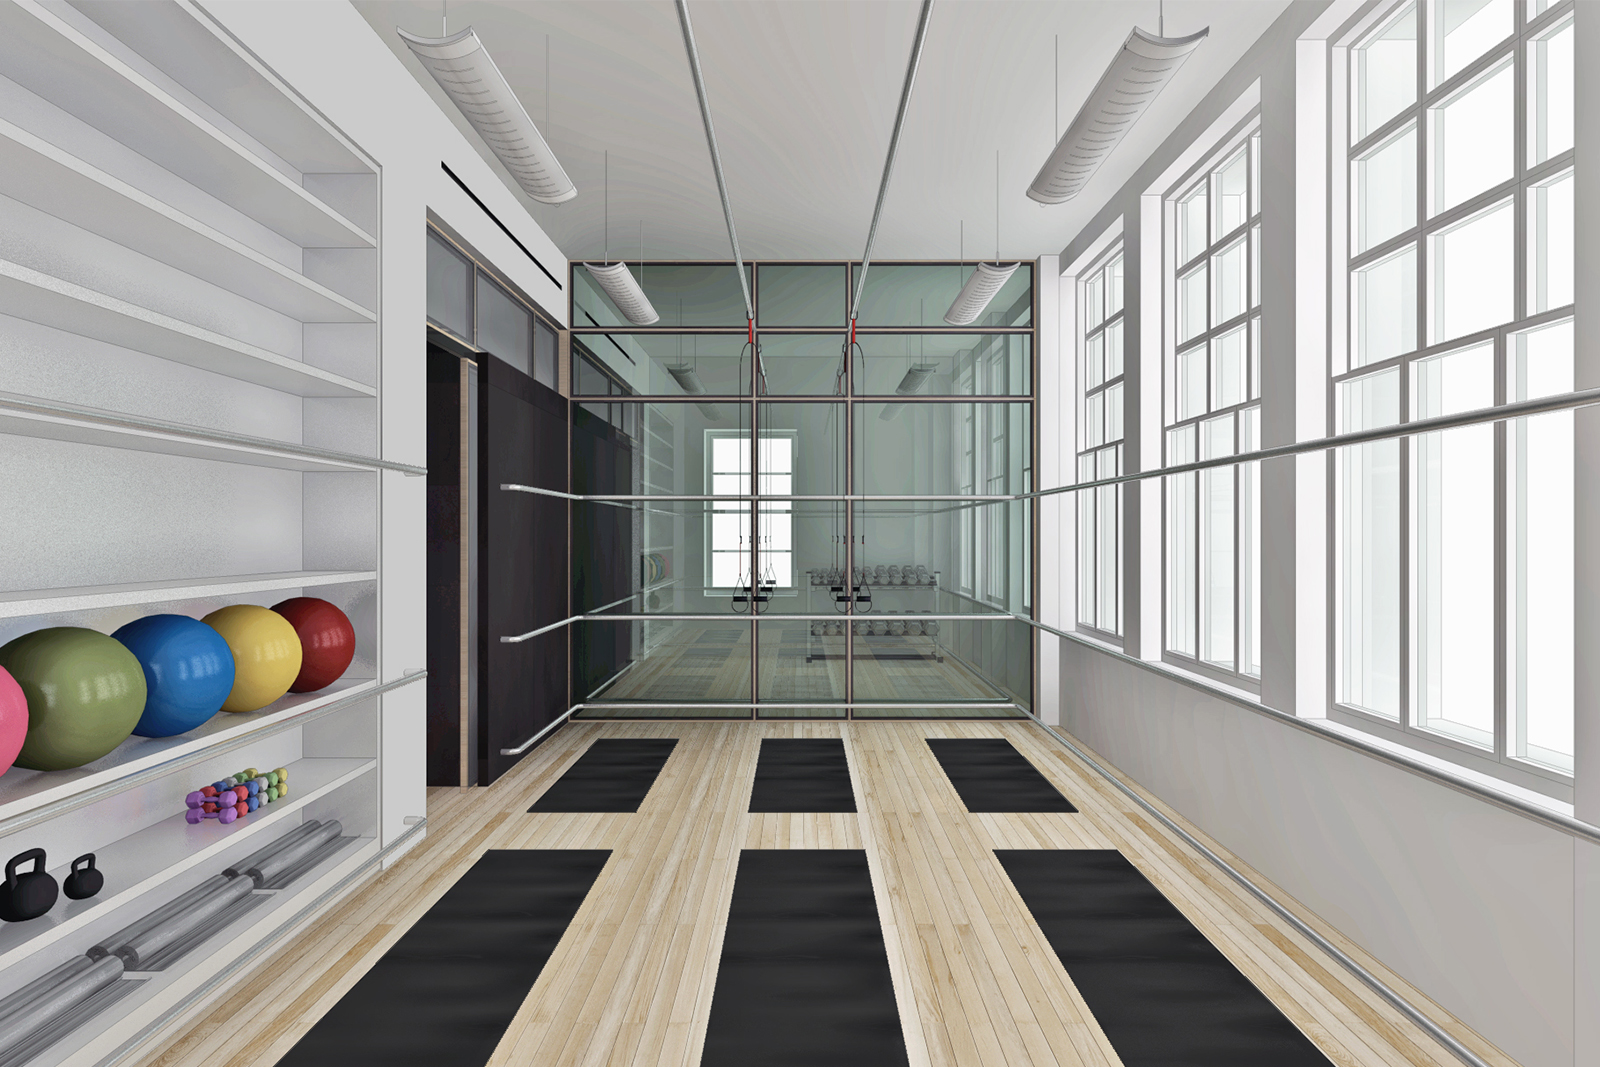 01-res4-resolution-4-architecture-modern-fitness-gym-commercial-interior-renovation-mpr-digital-studios-perspective-rendering.jpg